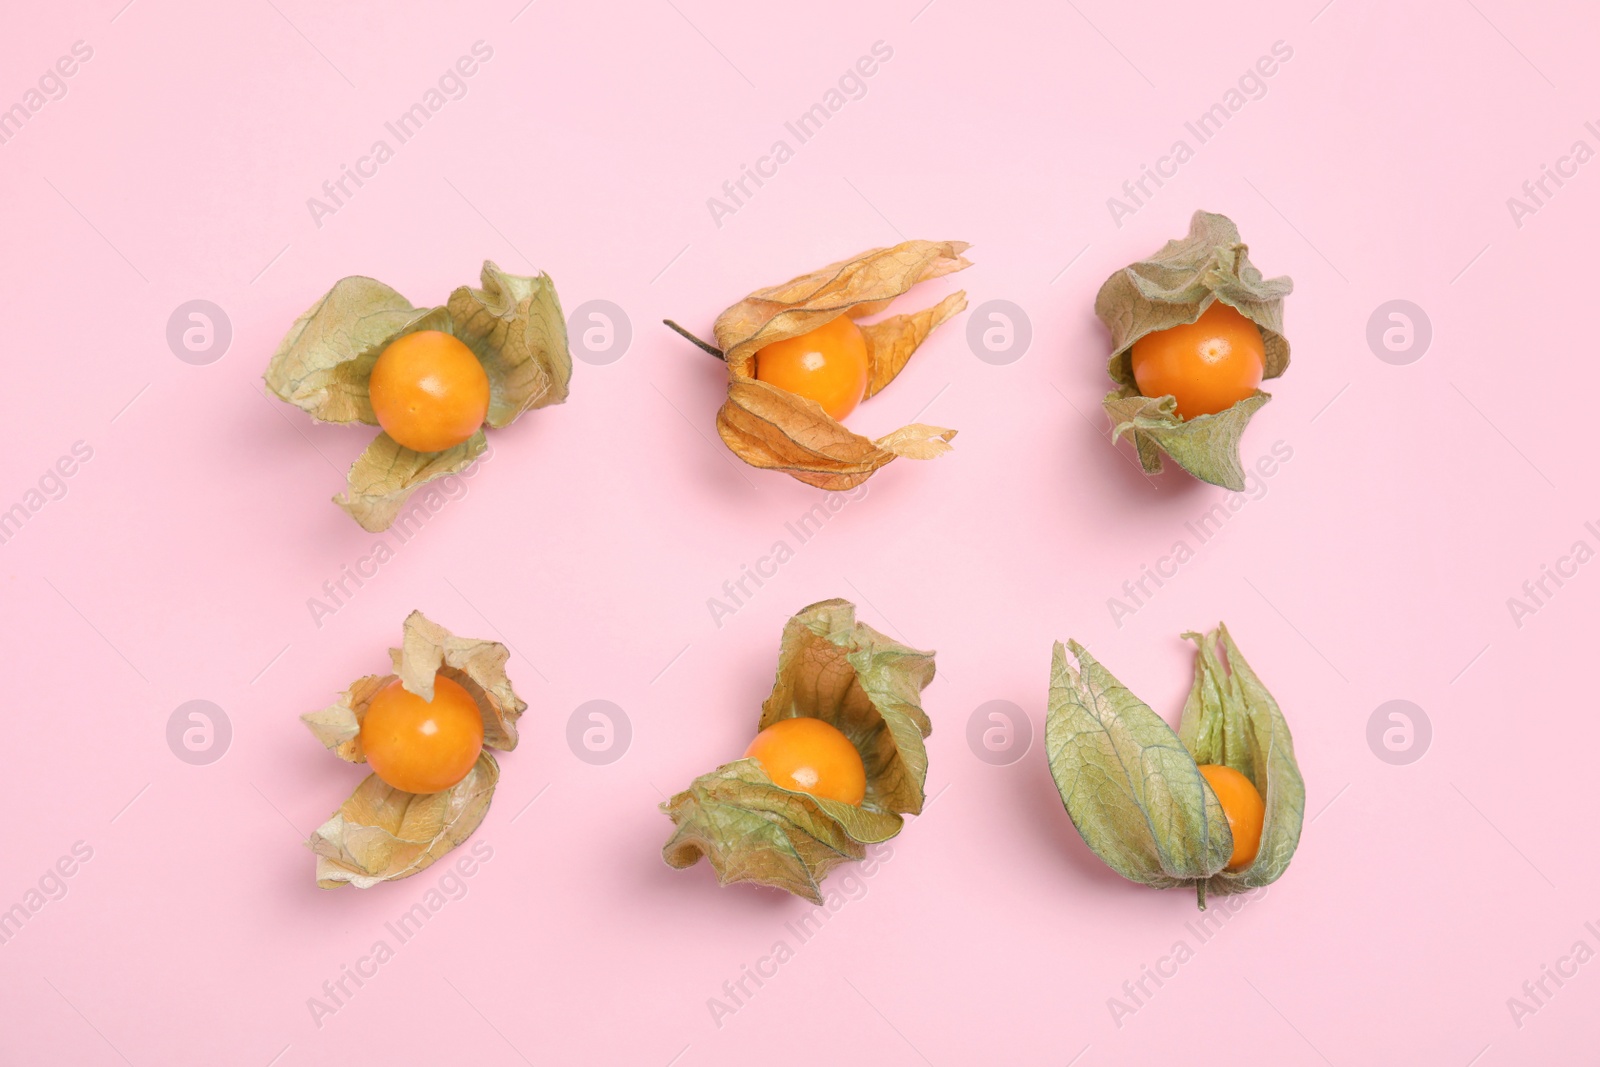 Photo of Ripe physalis fruits with dry husk on pink background, flat lay